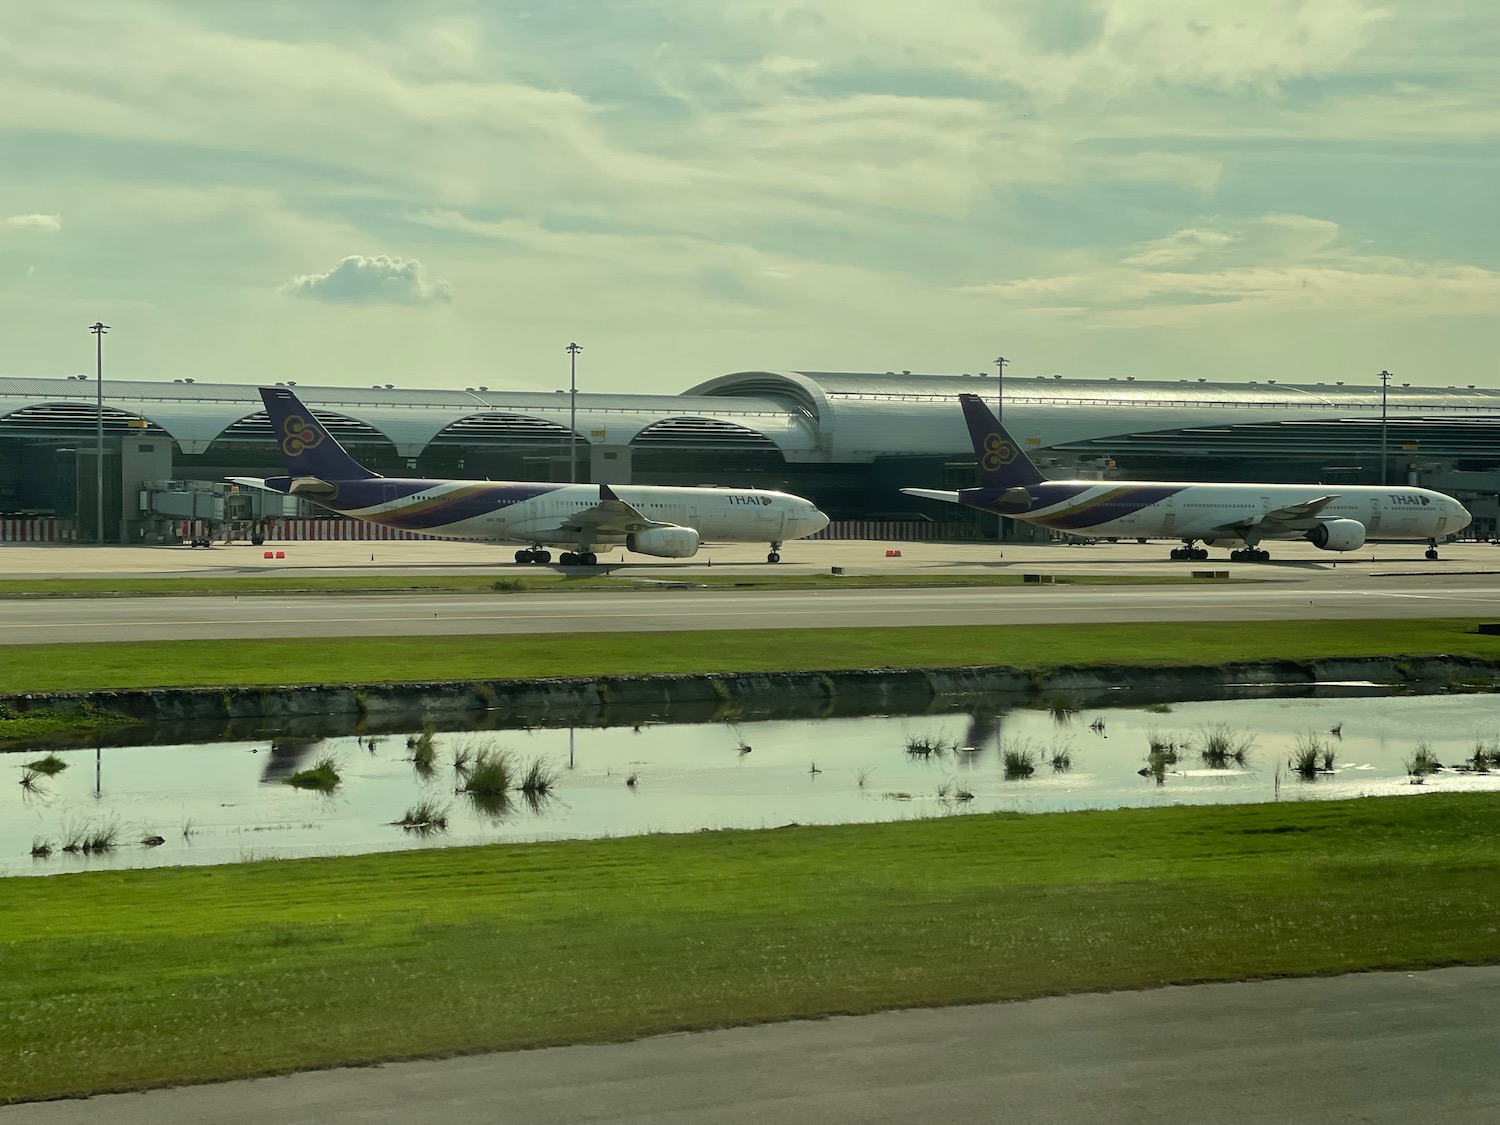 airplanes on the runway